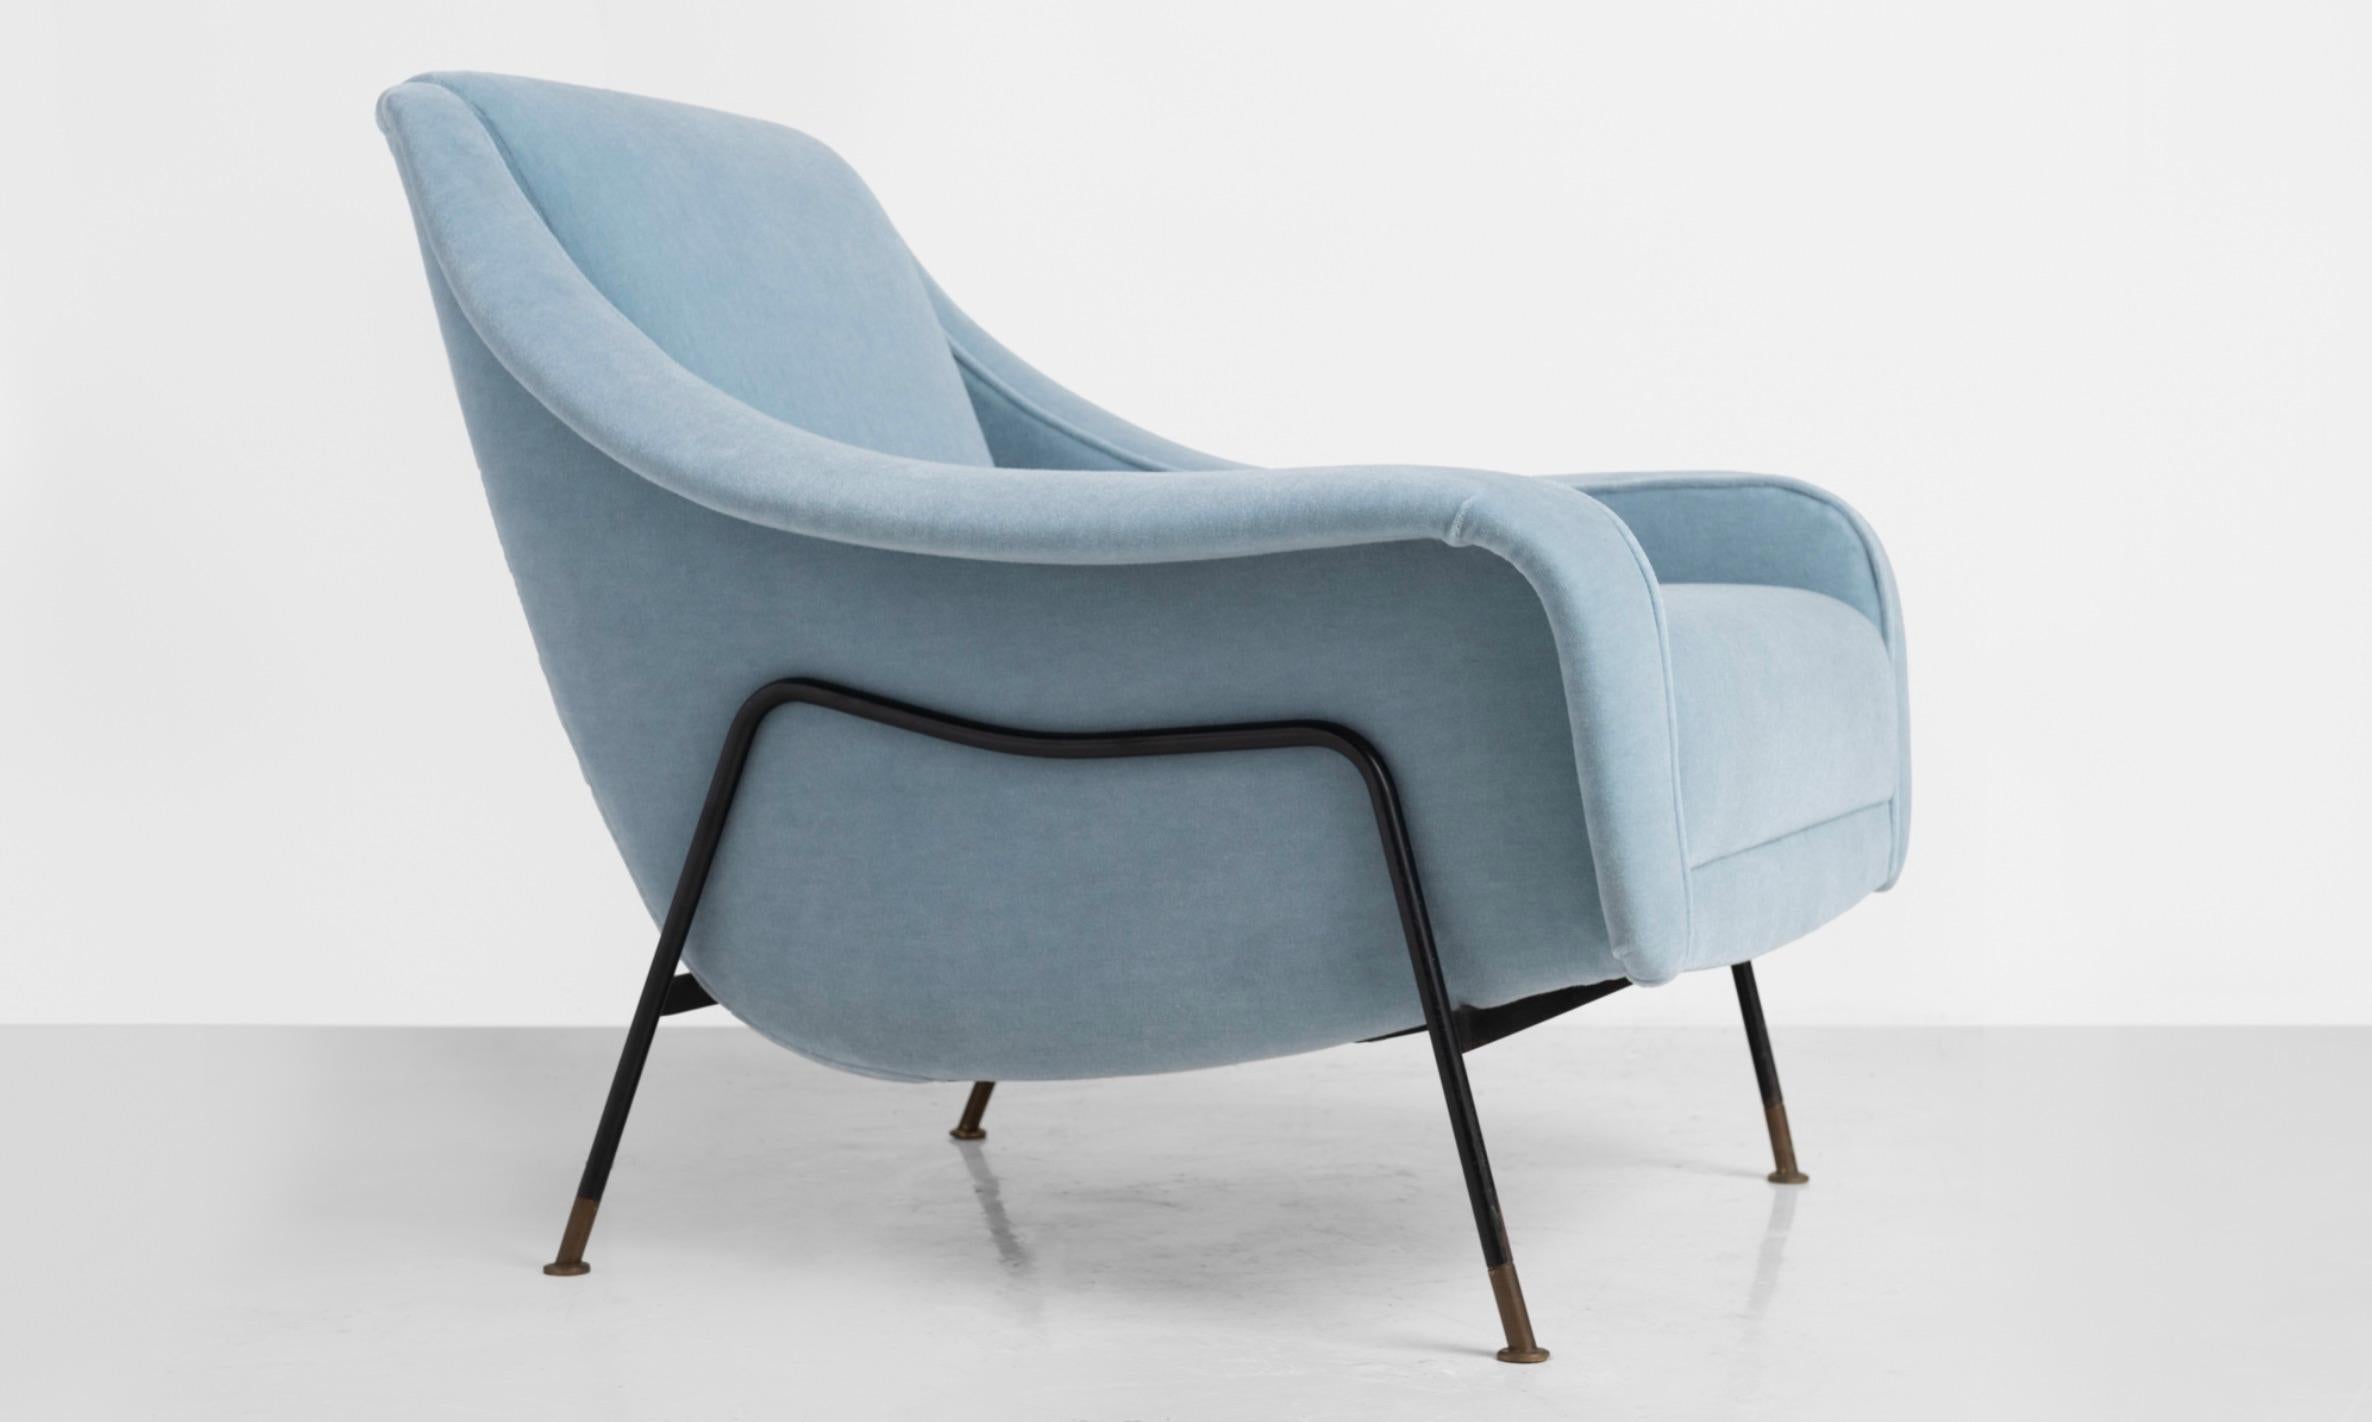 Pair of Ezio Minotti lounge chairs, Italy, 1950. Newly upholstered in blue Maharam Mohair supreme. Legs are black painted metal with brass feet. One pair (2 total) available.

 